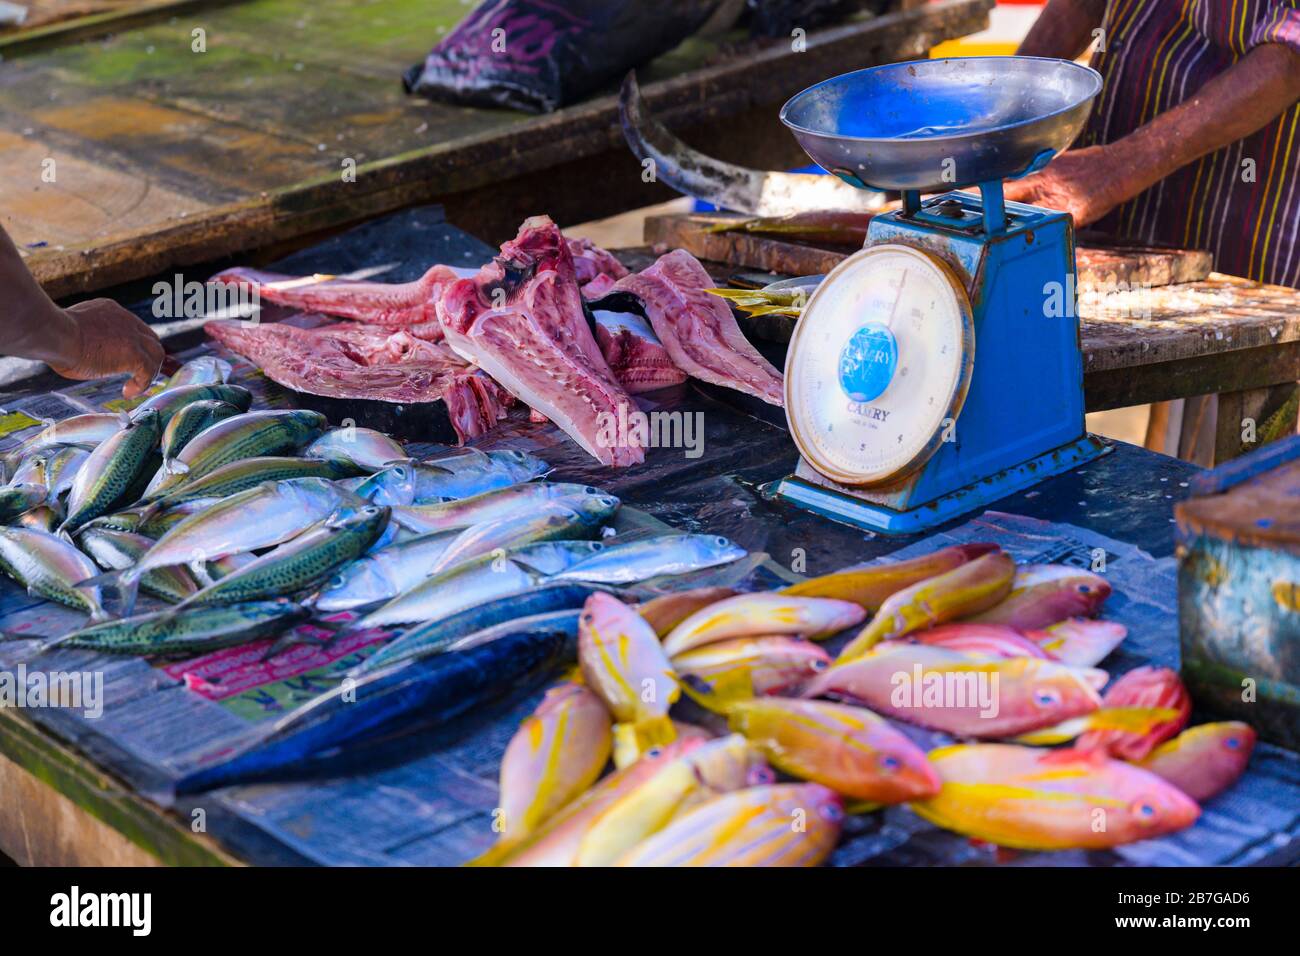 South Asia Sri Lanka Fort Galle colonial town centre old ancient harbour port fresh fish stall mullet bream scales Stock Photo